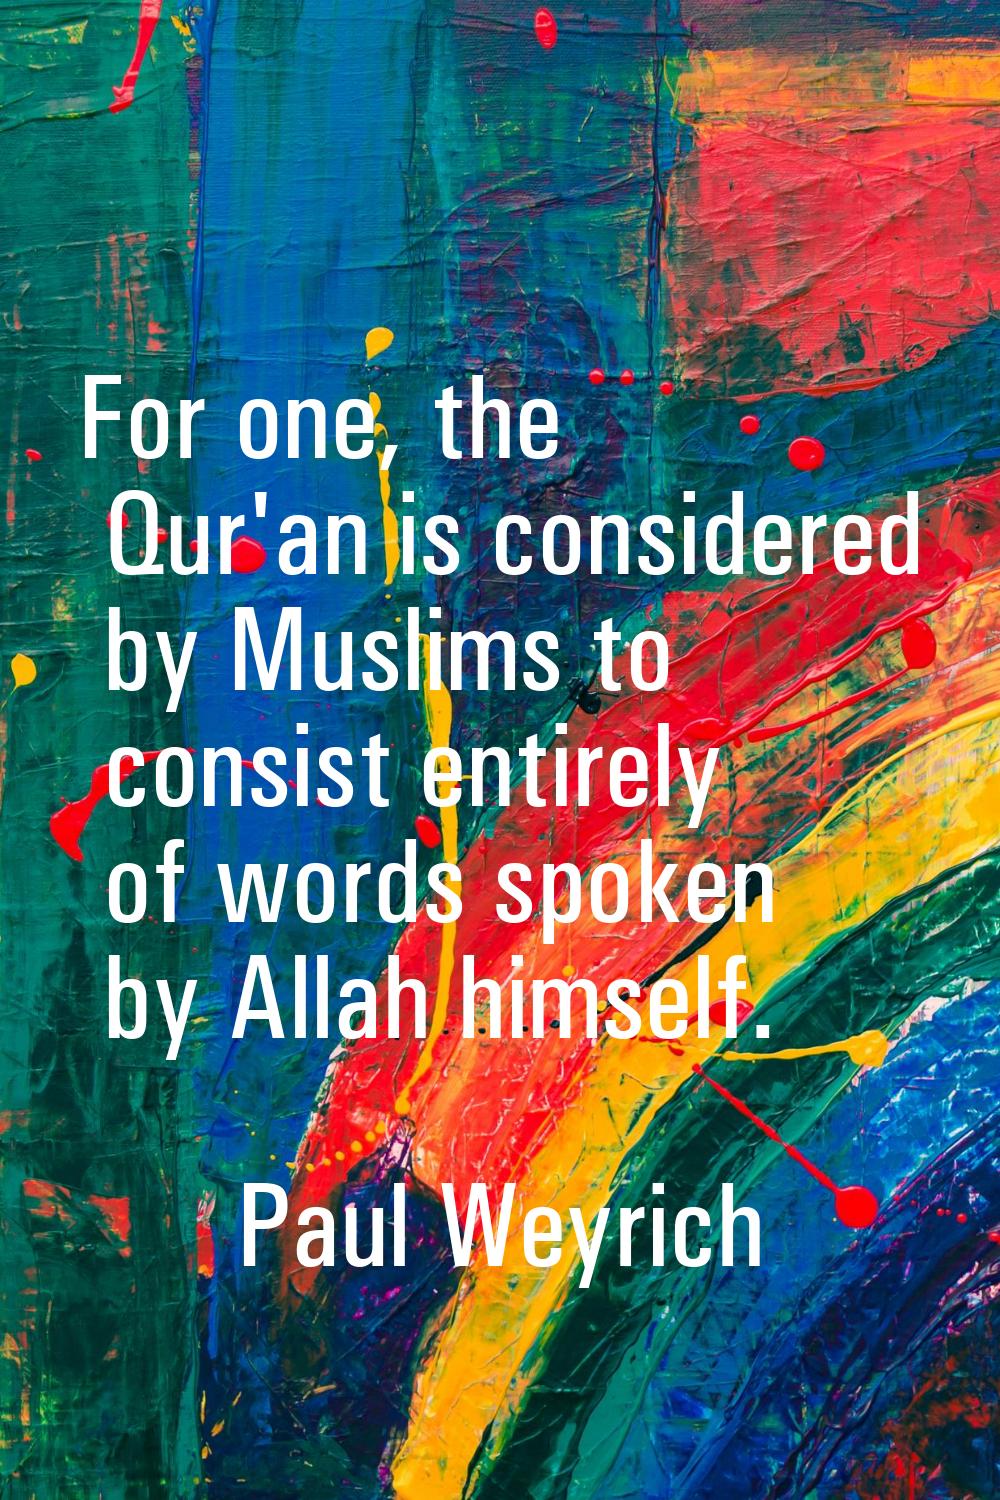 For one, the Qur'an is considered by Muslims to consist entirely of words spoken by Allah himself.